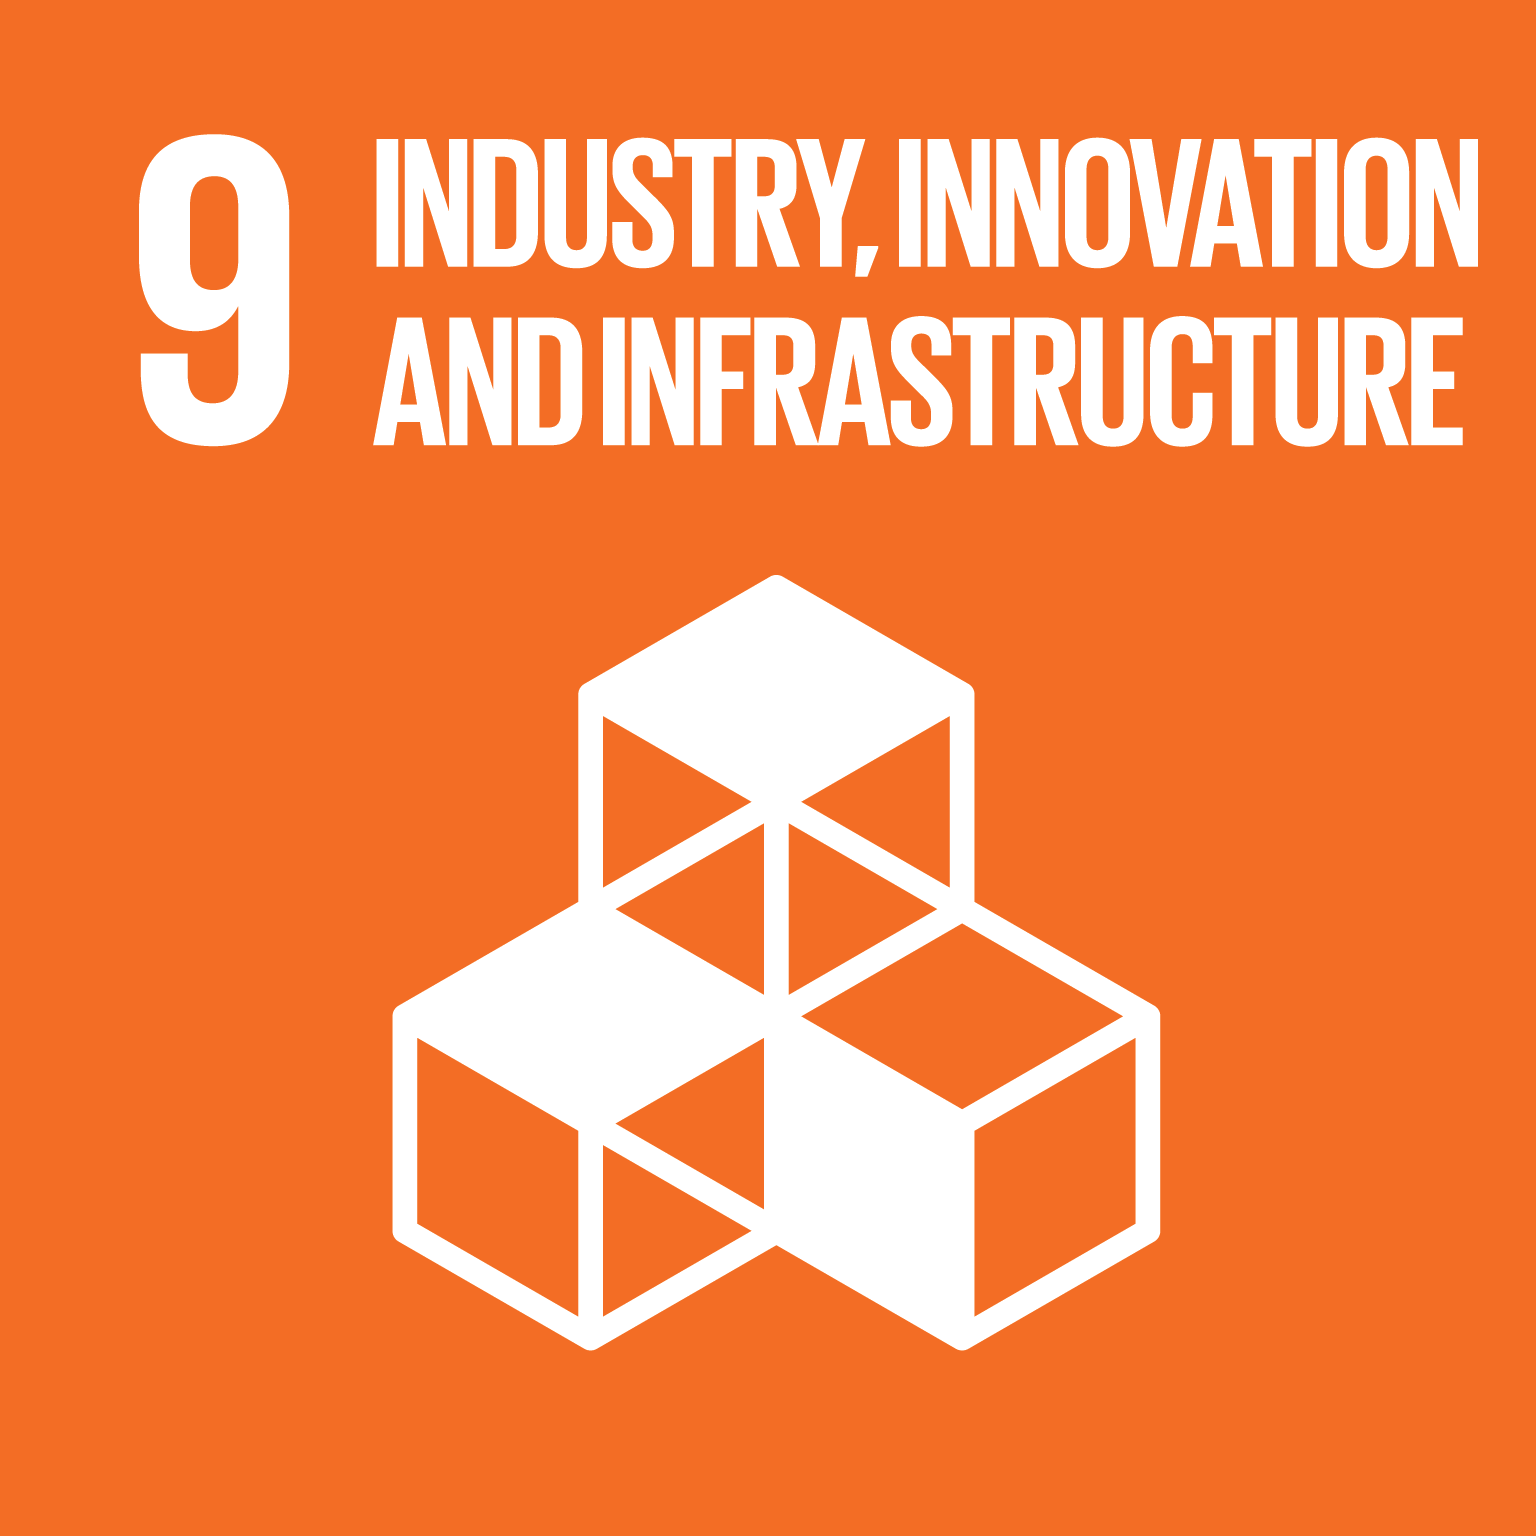 Goal 9: Infrastructure, the text of this infographic is listed below